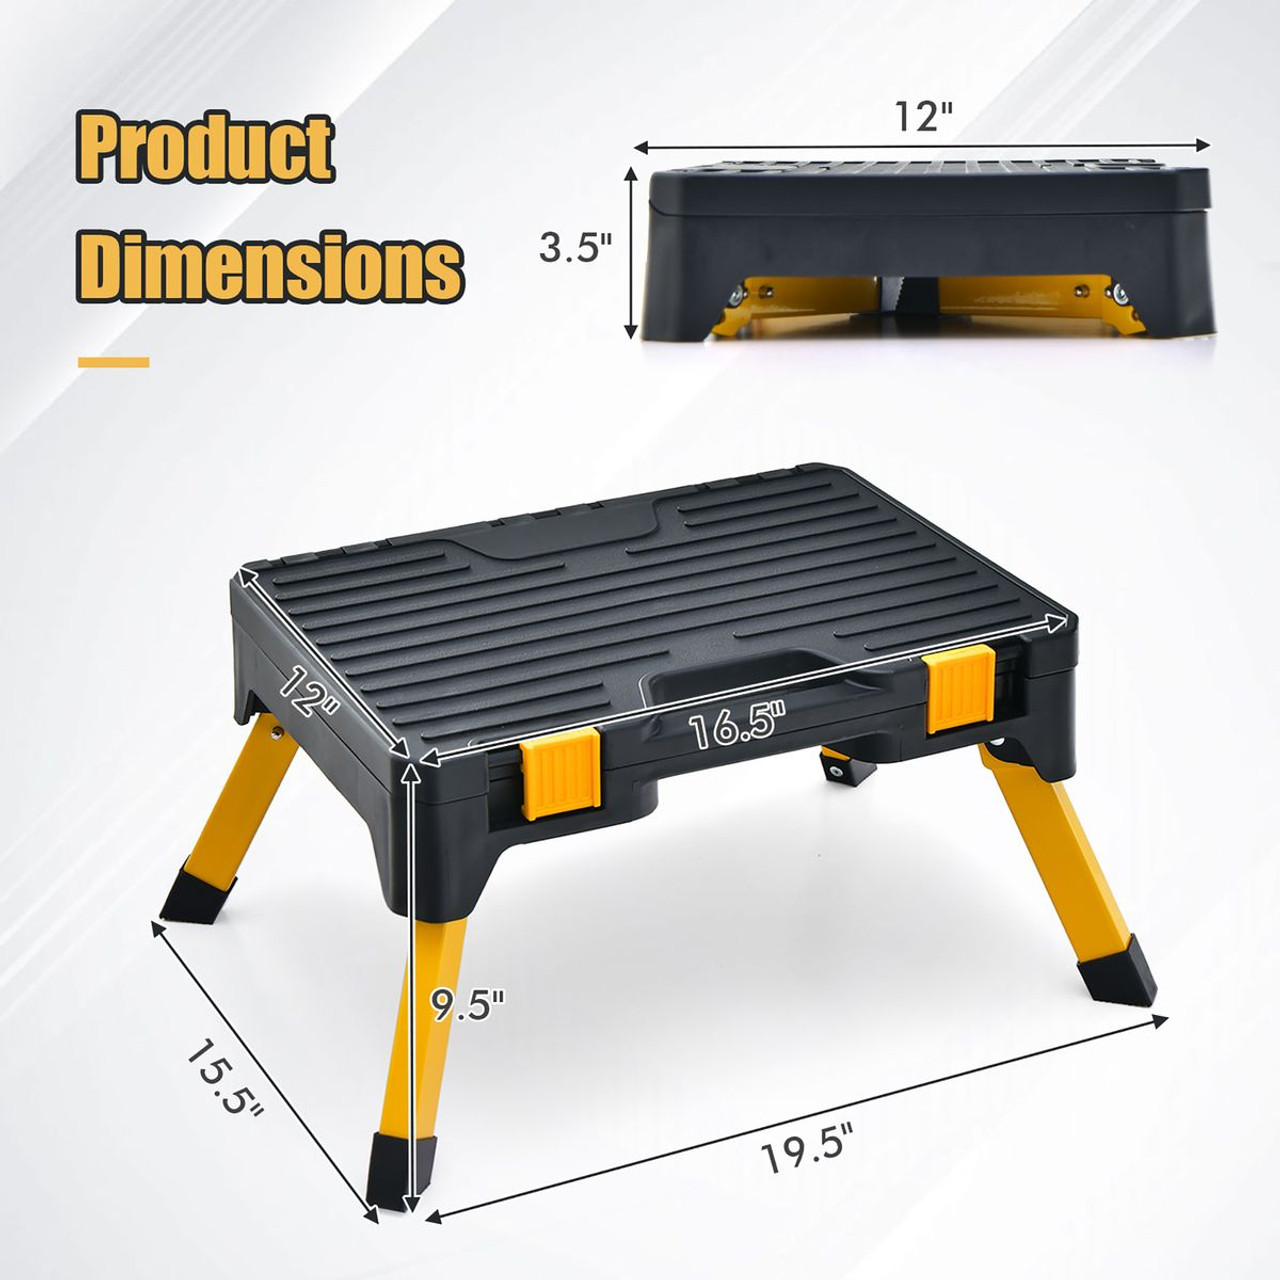 2-in-1 Step Ladder Toolbox Stool product image